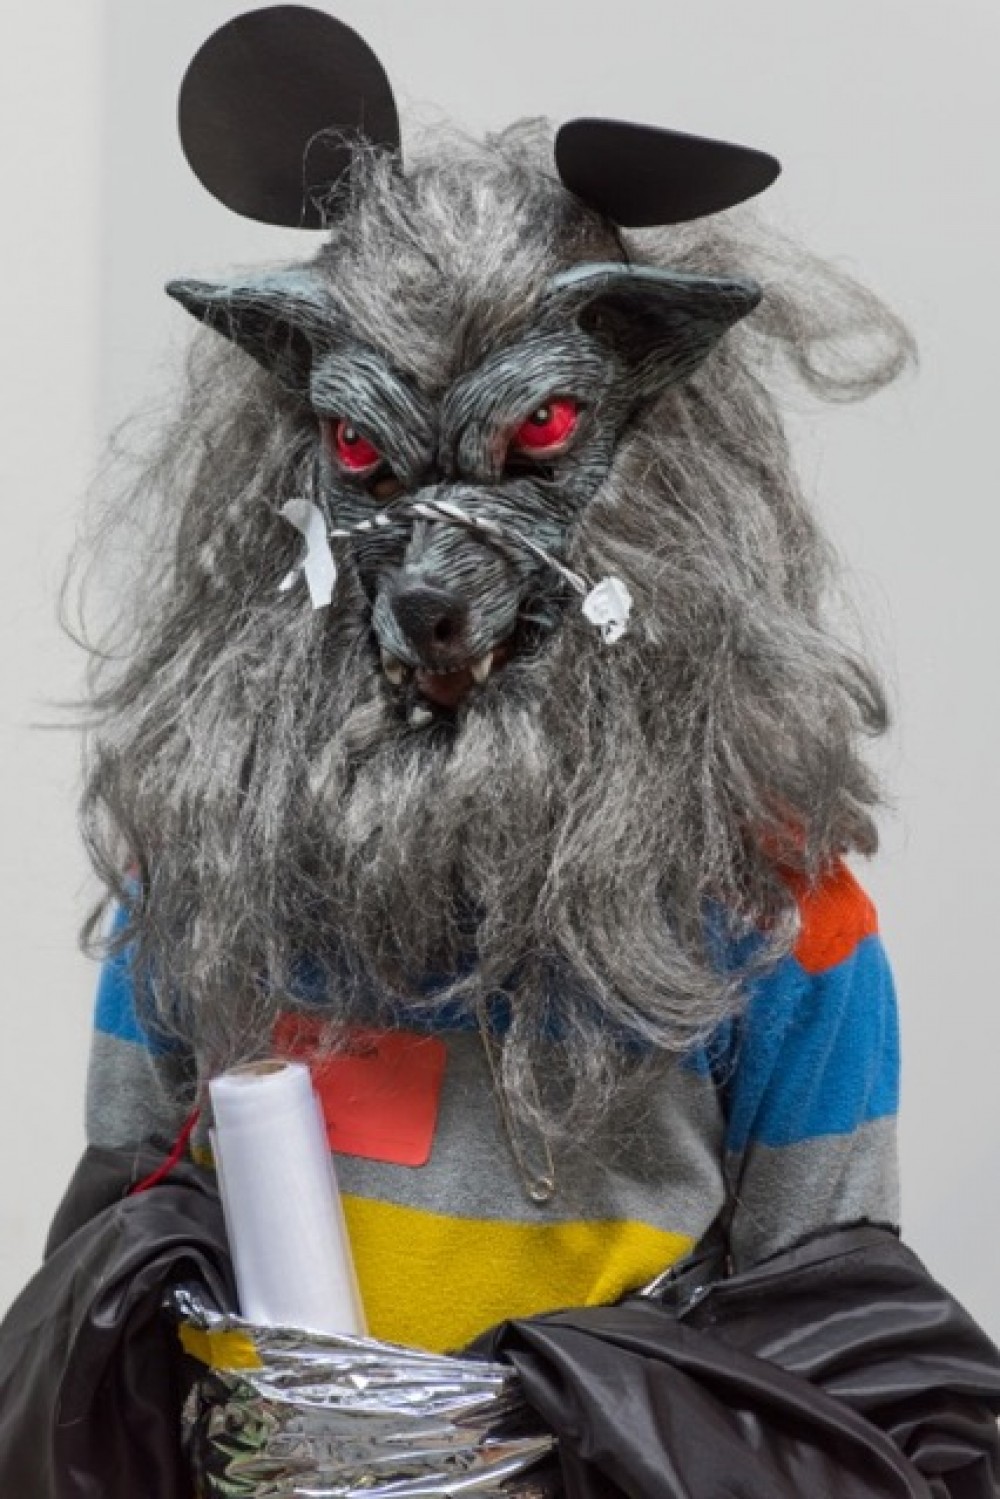 Someone wearing a stripped top and a werwolf mask is centred in the photograph. They have a role of plastic tucked into their clothing.